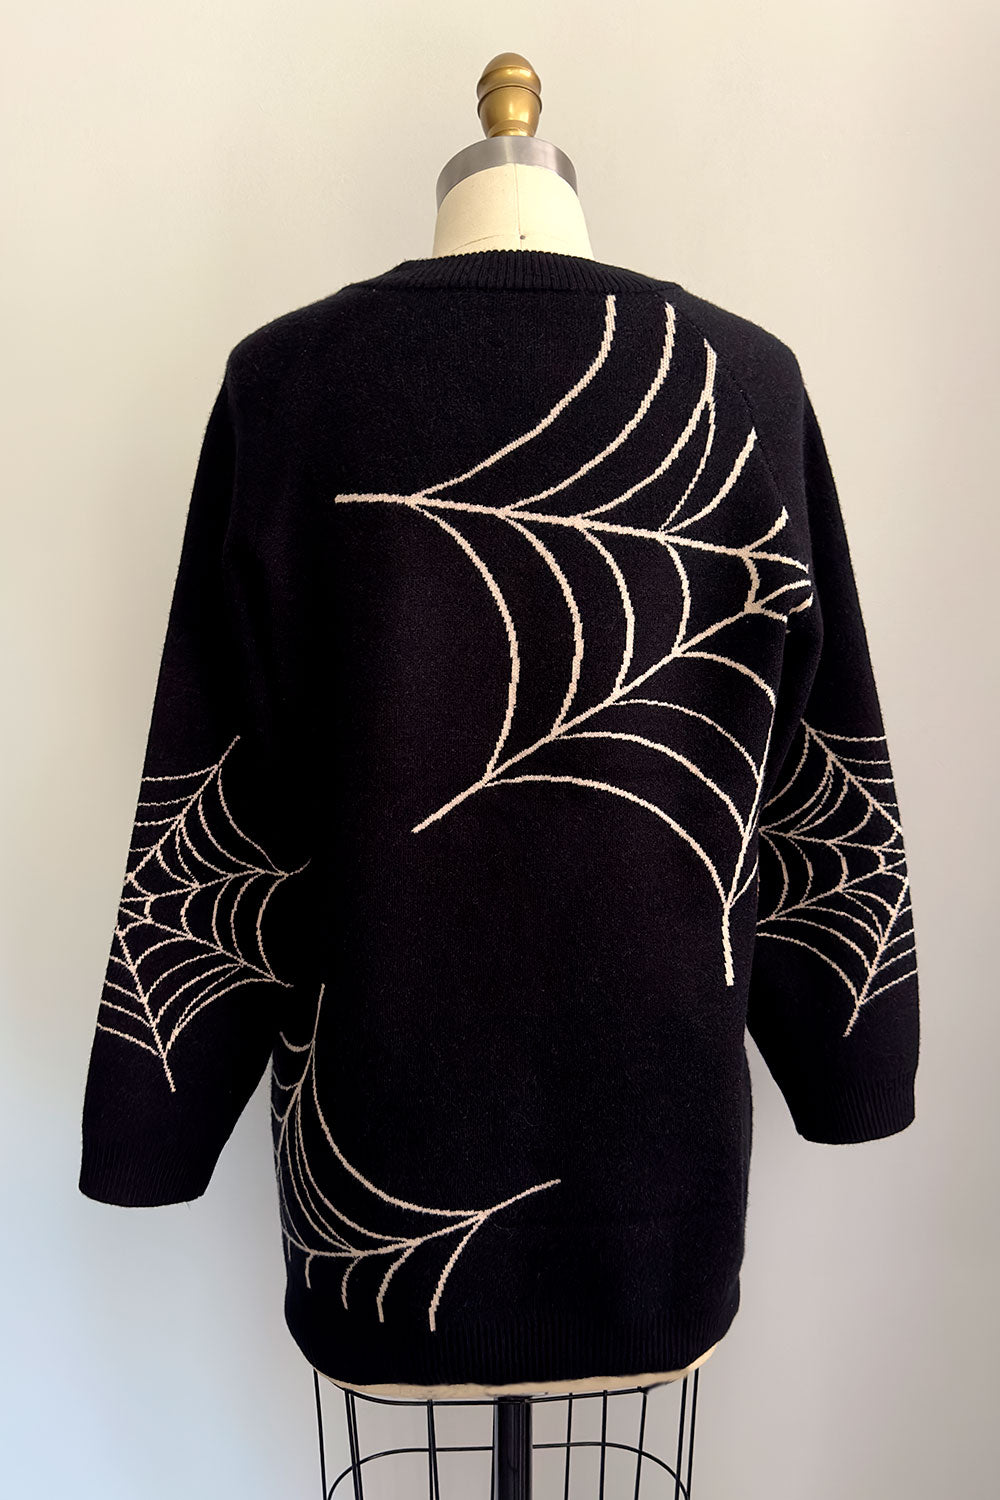 Whimsical Web Sweater Black with Ivory Spiderwebs